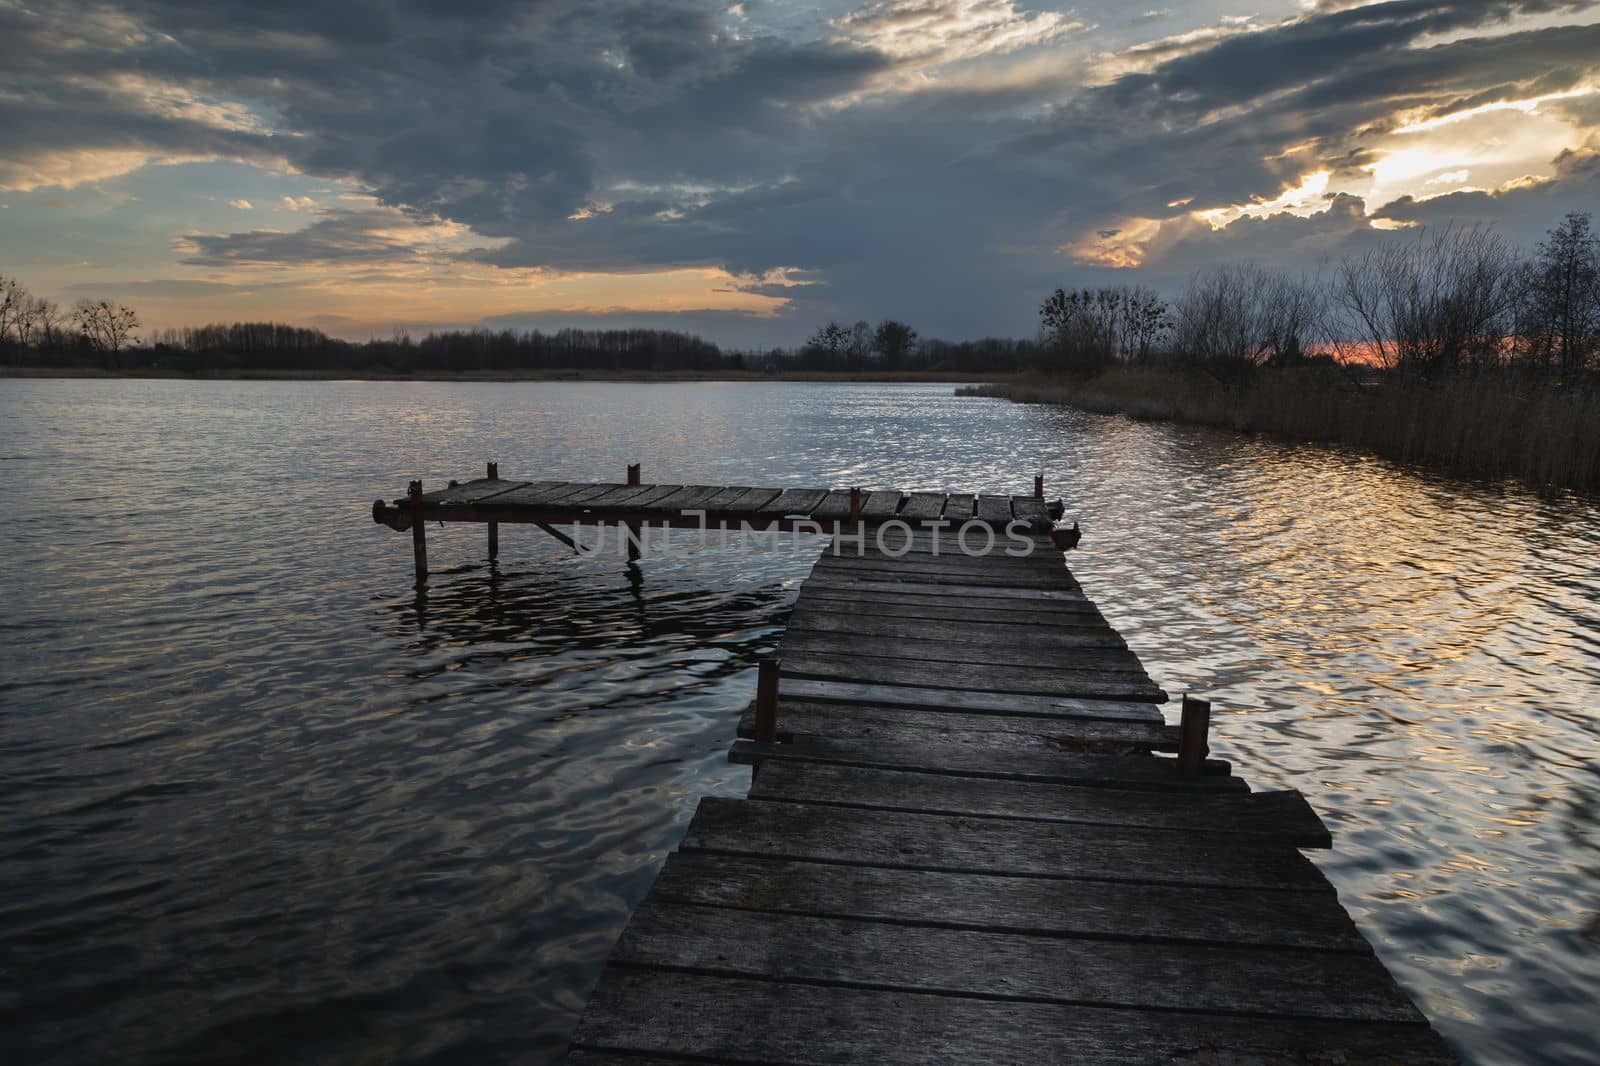 Wooden jetty and lake with evening clouds, water landscape